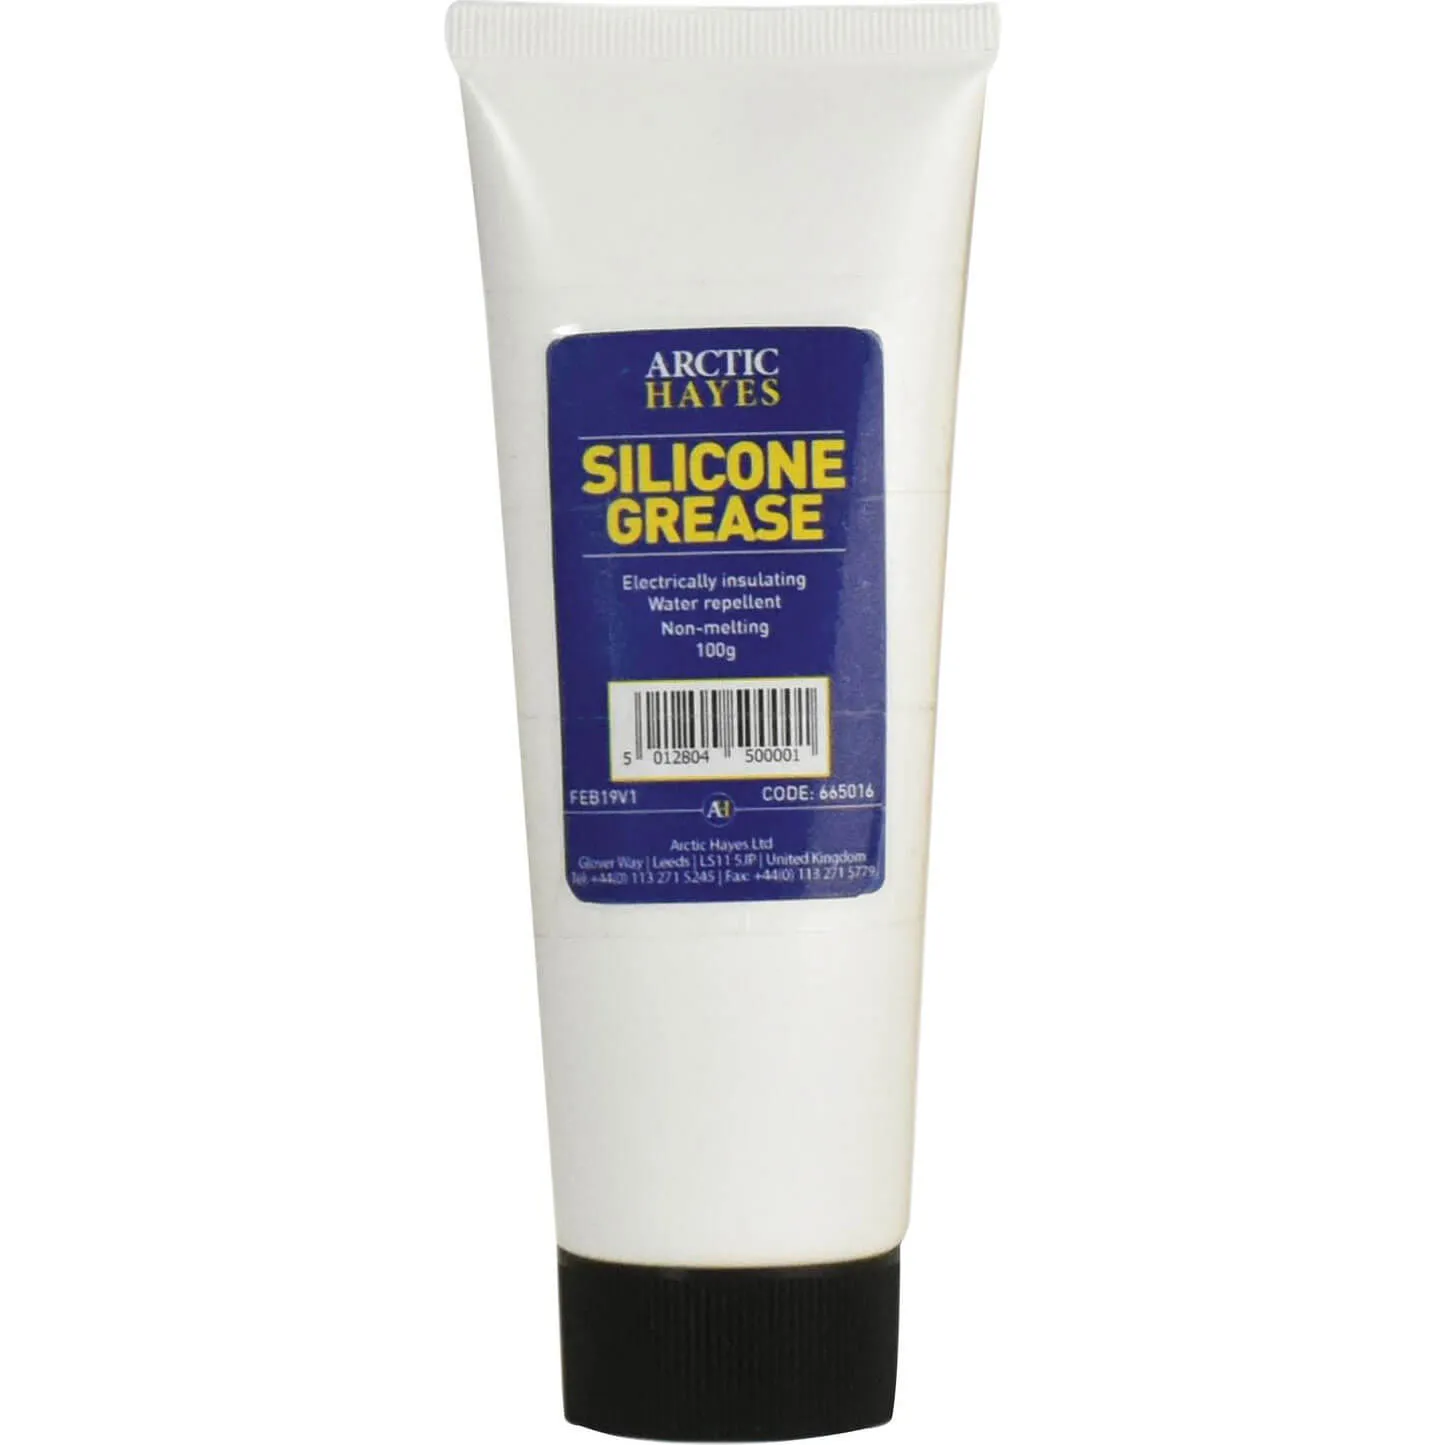 Arctic Hayes Silicone Grease - 100g